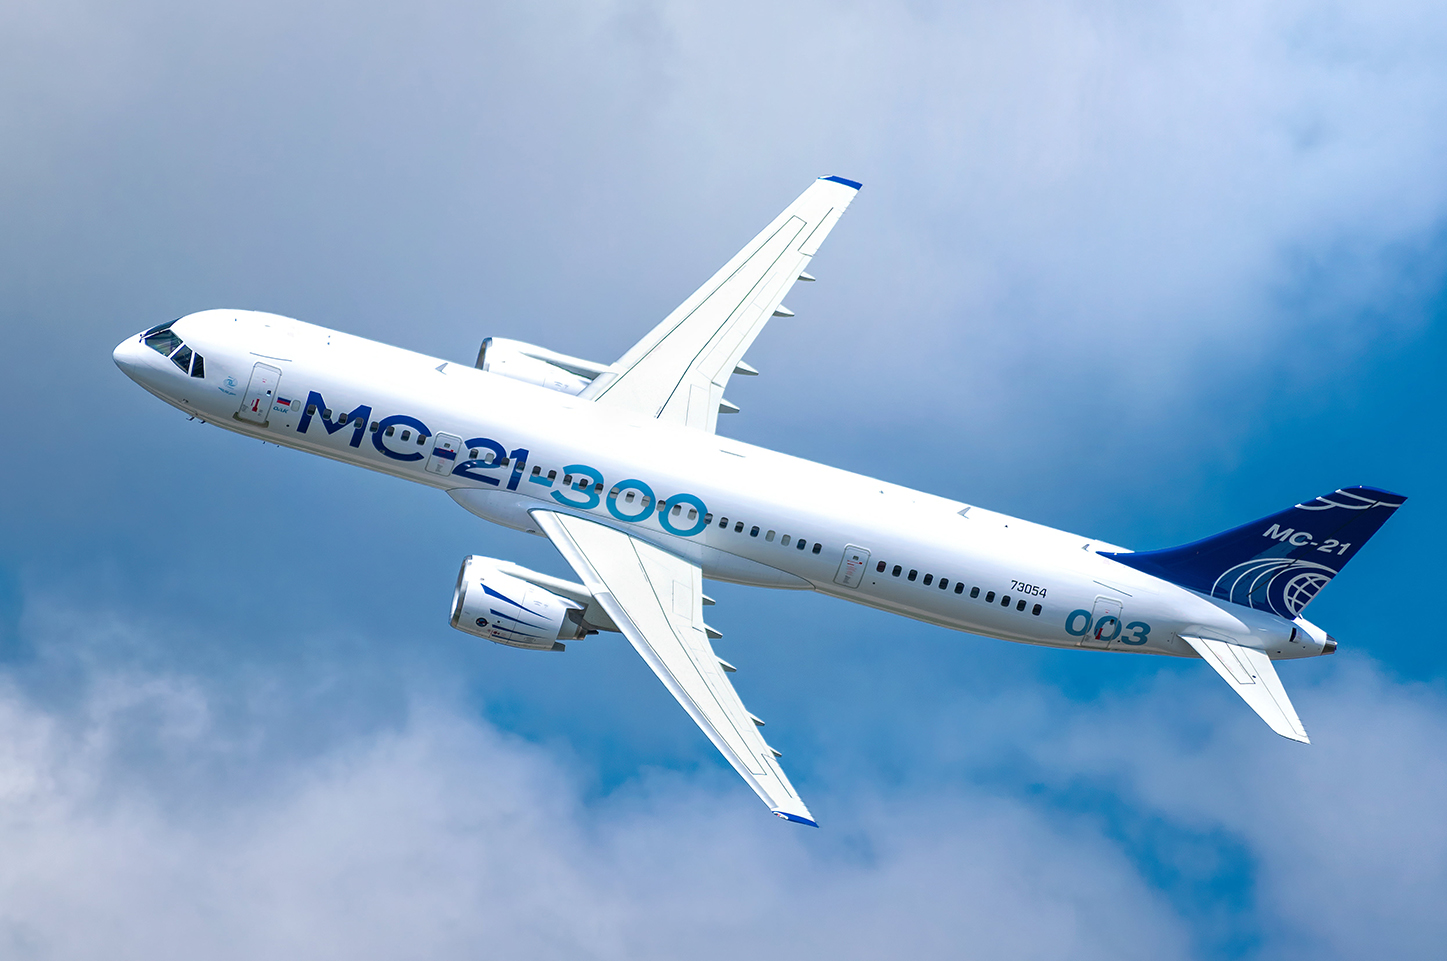 UAC to showcase MC-21 and CR929 advanced commercial aircraft at MAKS-2019